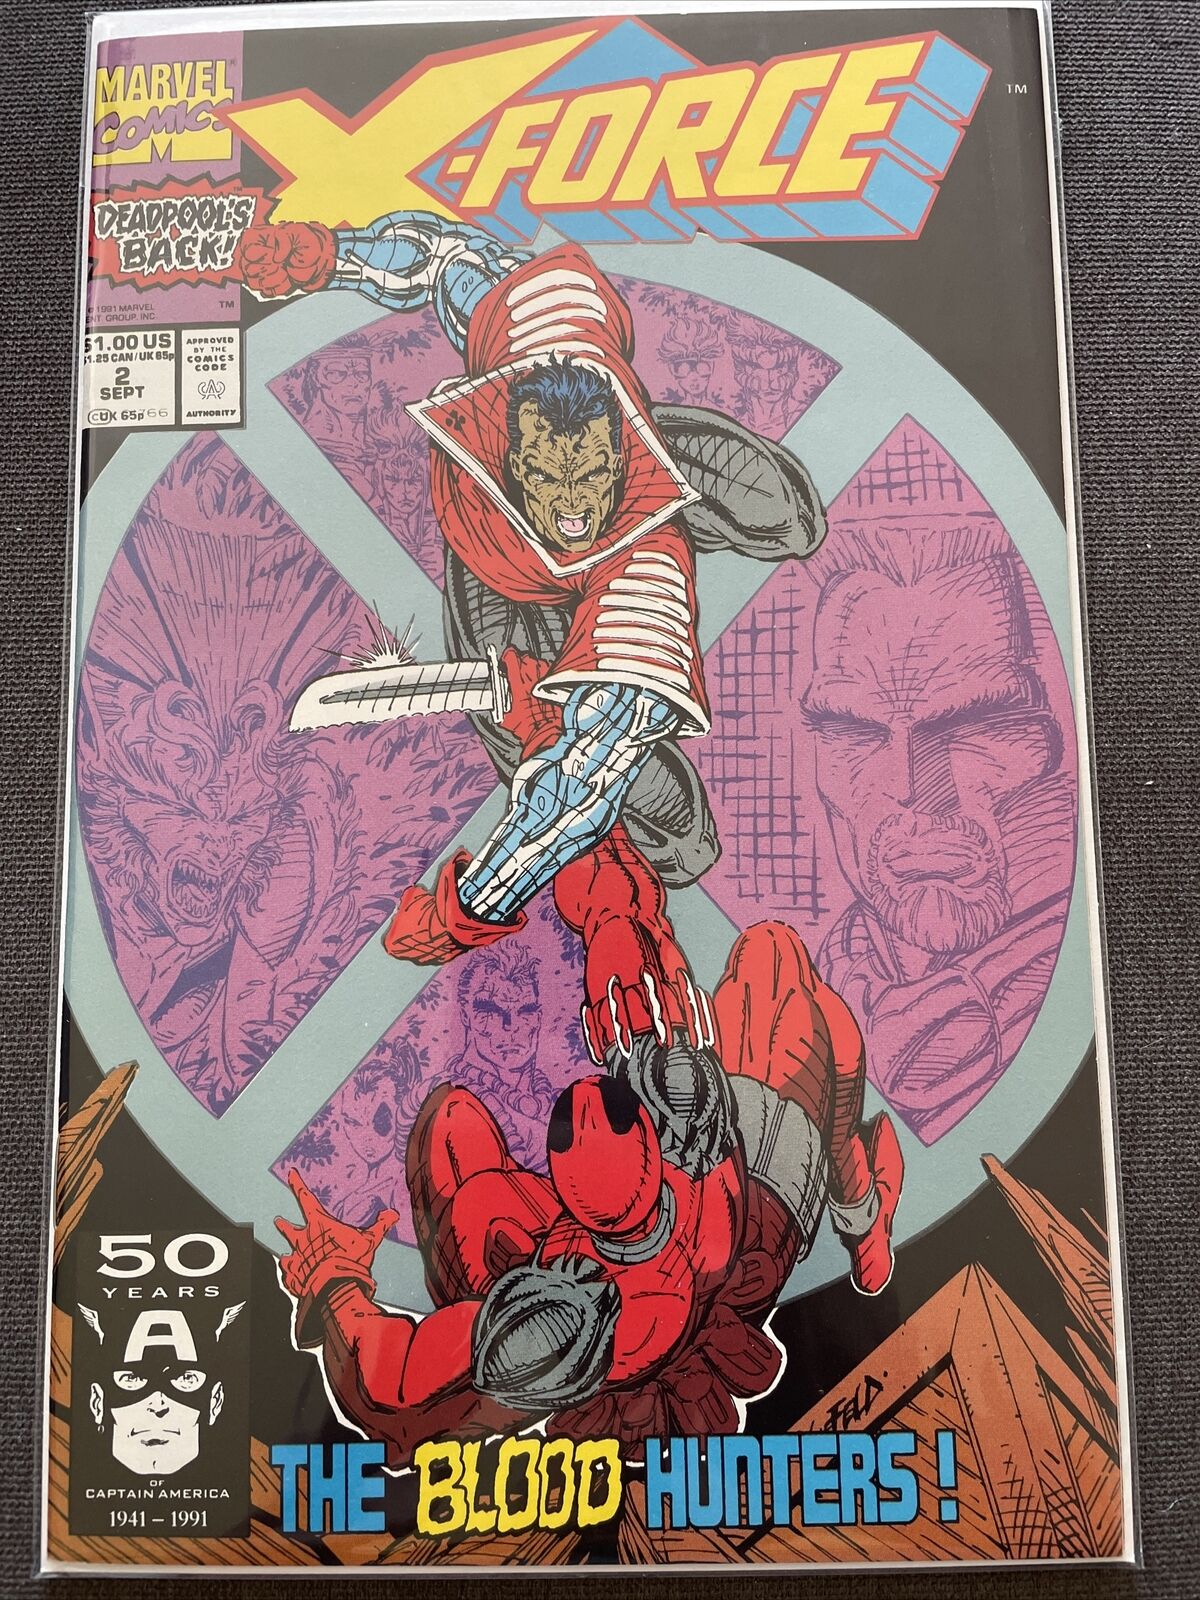 Marvel - X-FORCE #2 (Great Condition) bagged and boarded